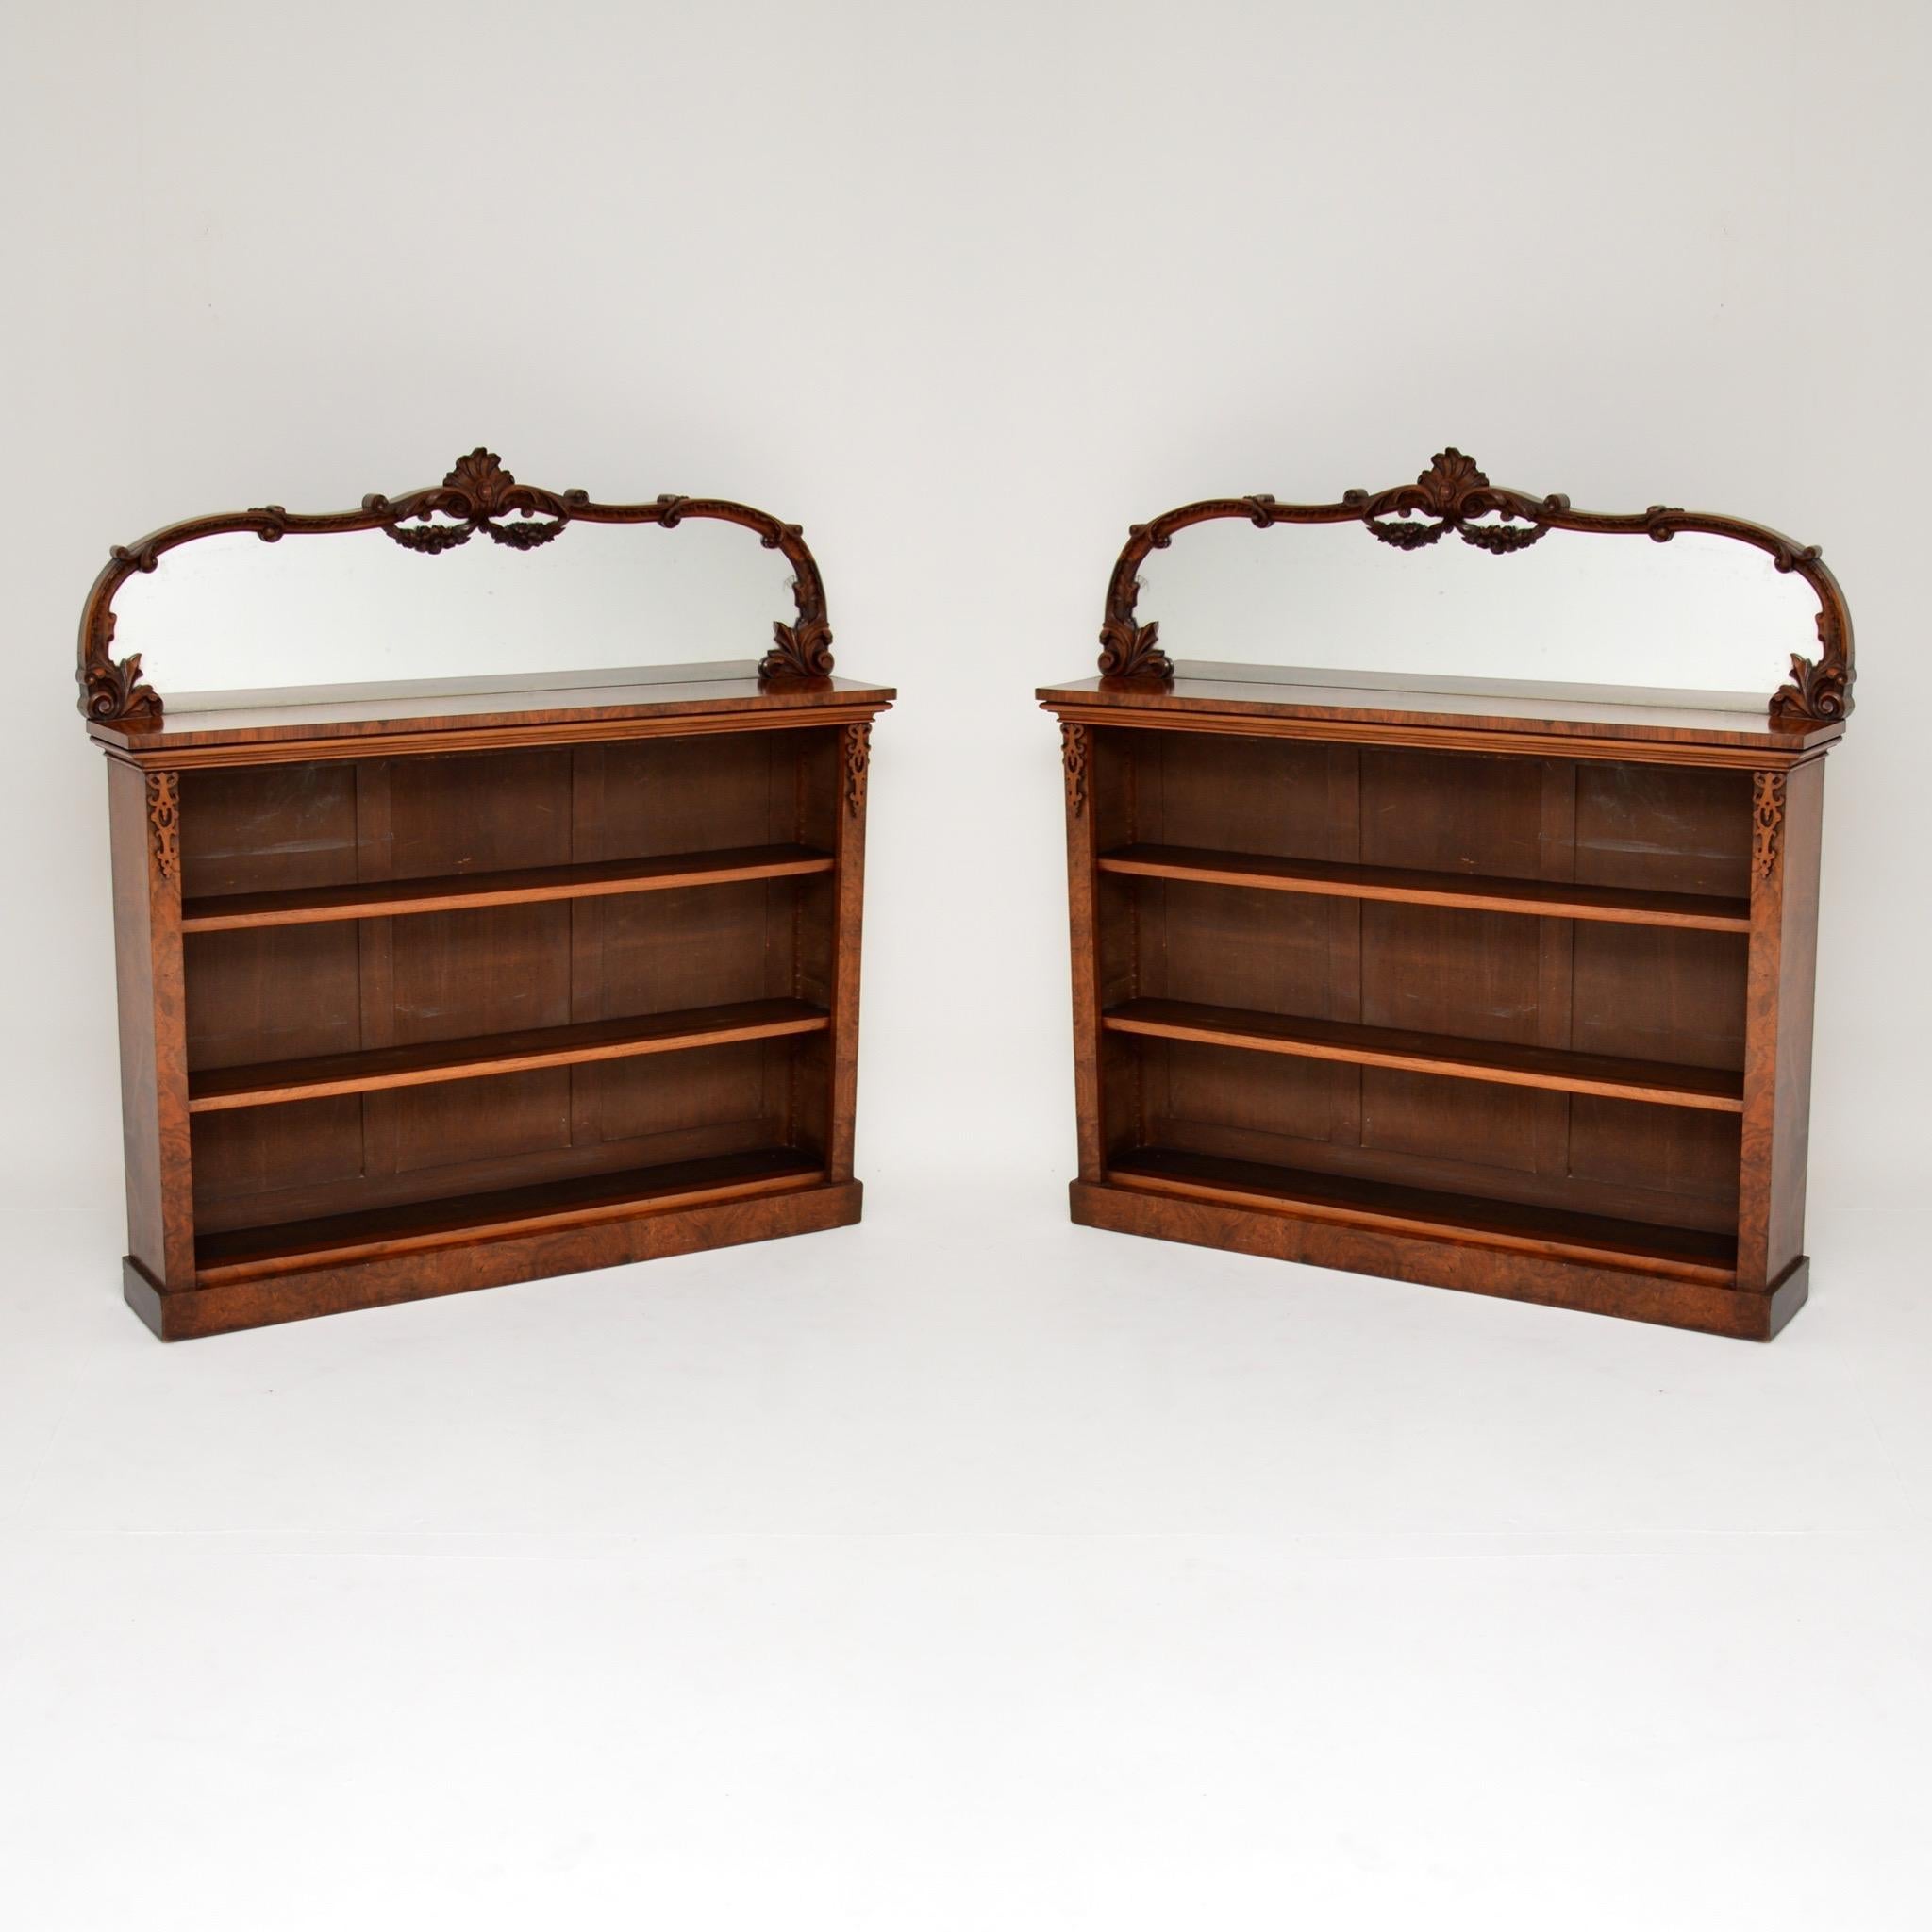 Stunning and rare pair of antique early Victorian burr walnut open bookcases with original mirrored backs. They are in excellent original condition and date from circa 1860s-1870s period.

One on it’s own would be very nice, but to find a pair